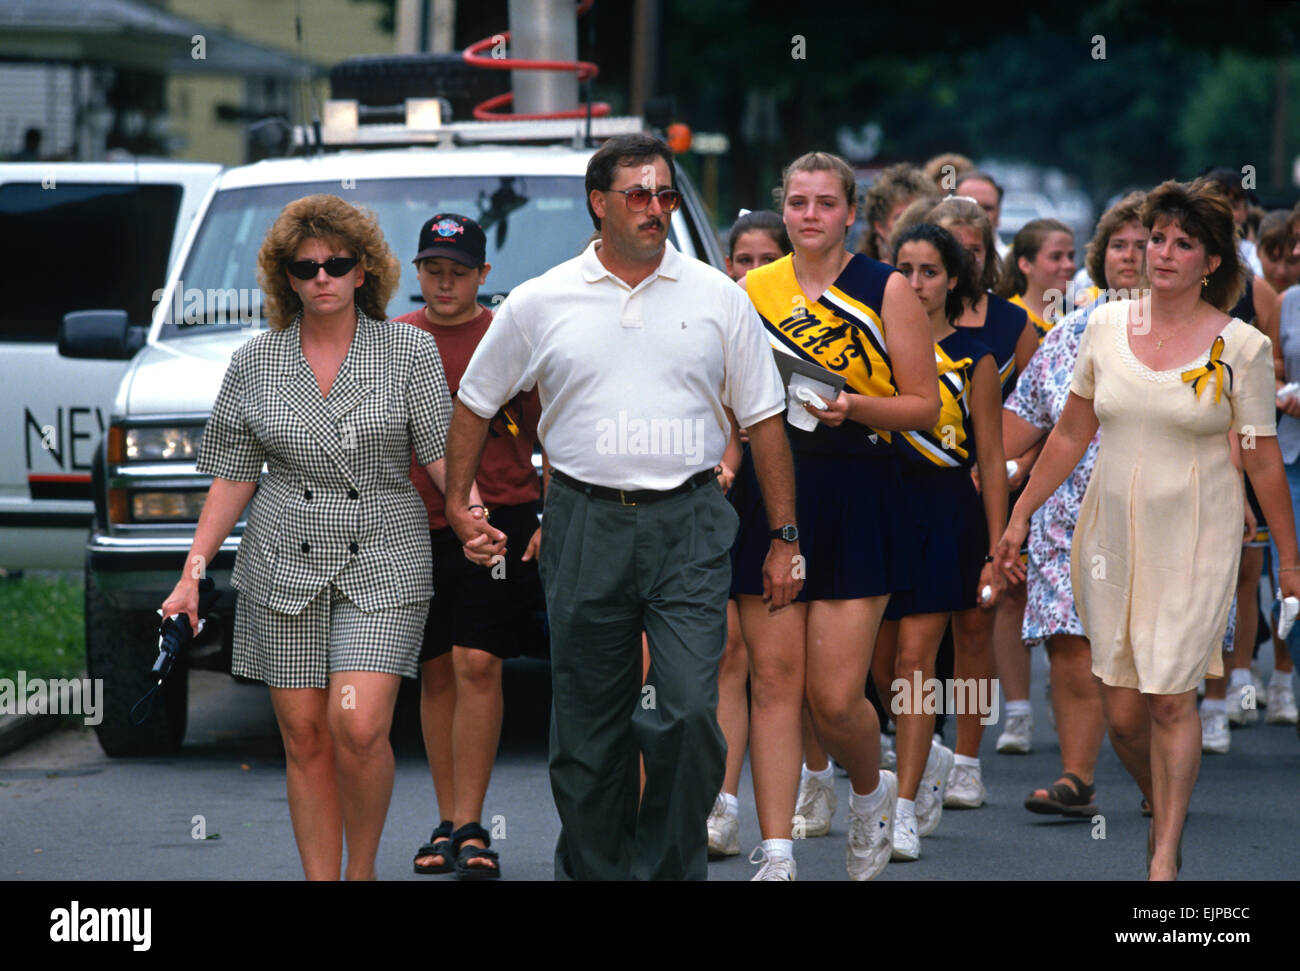 Families of the 21 students and chaperones killed aboard TWA Airlines Flight 800 walk together to a memorial service July 18, 1996 in Montoursville, PA. TWA Flight 800 exploded off East Moriches, NY with the loss of 230 lives. Stock Photo